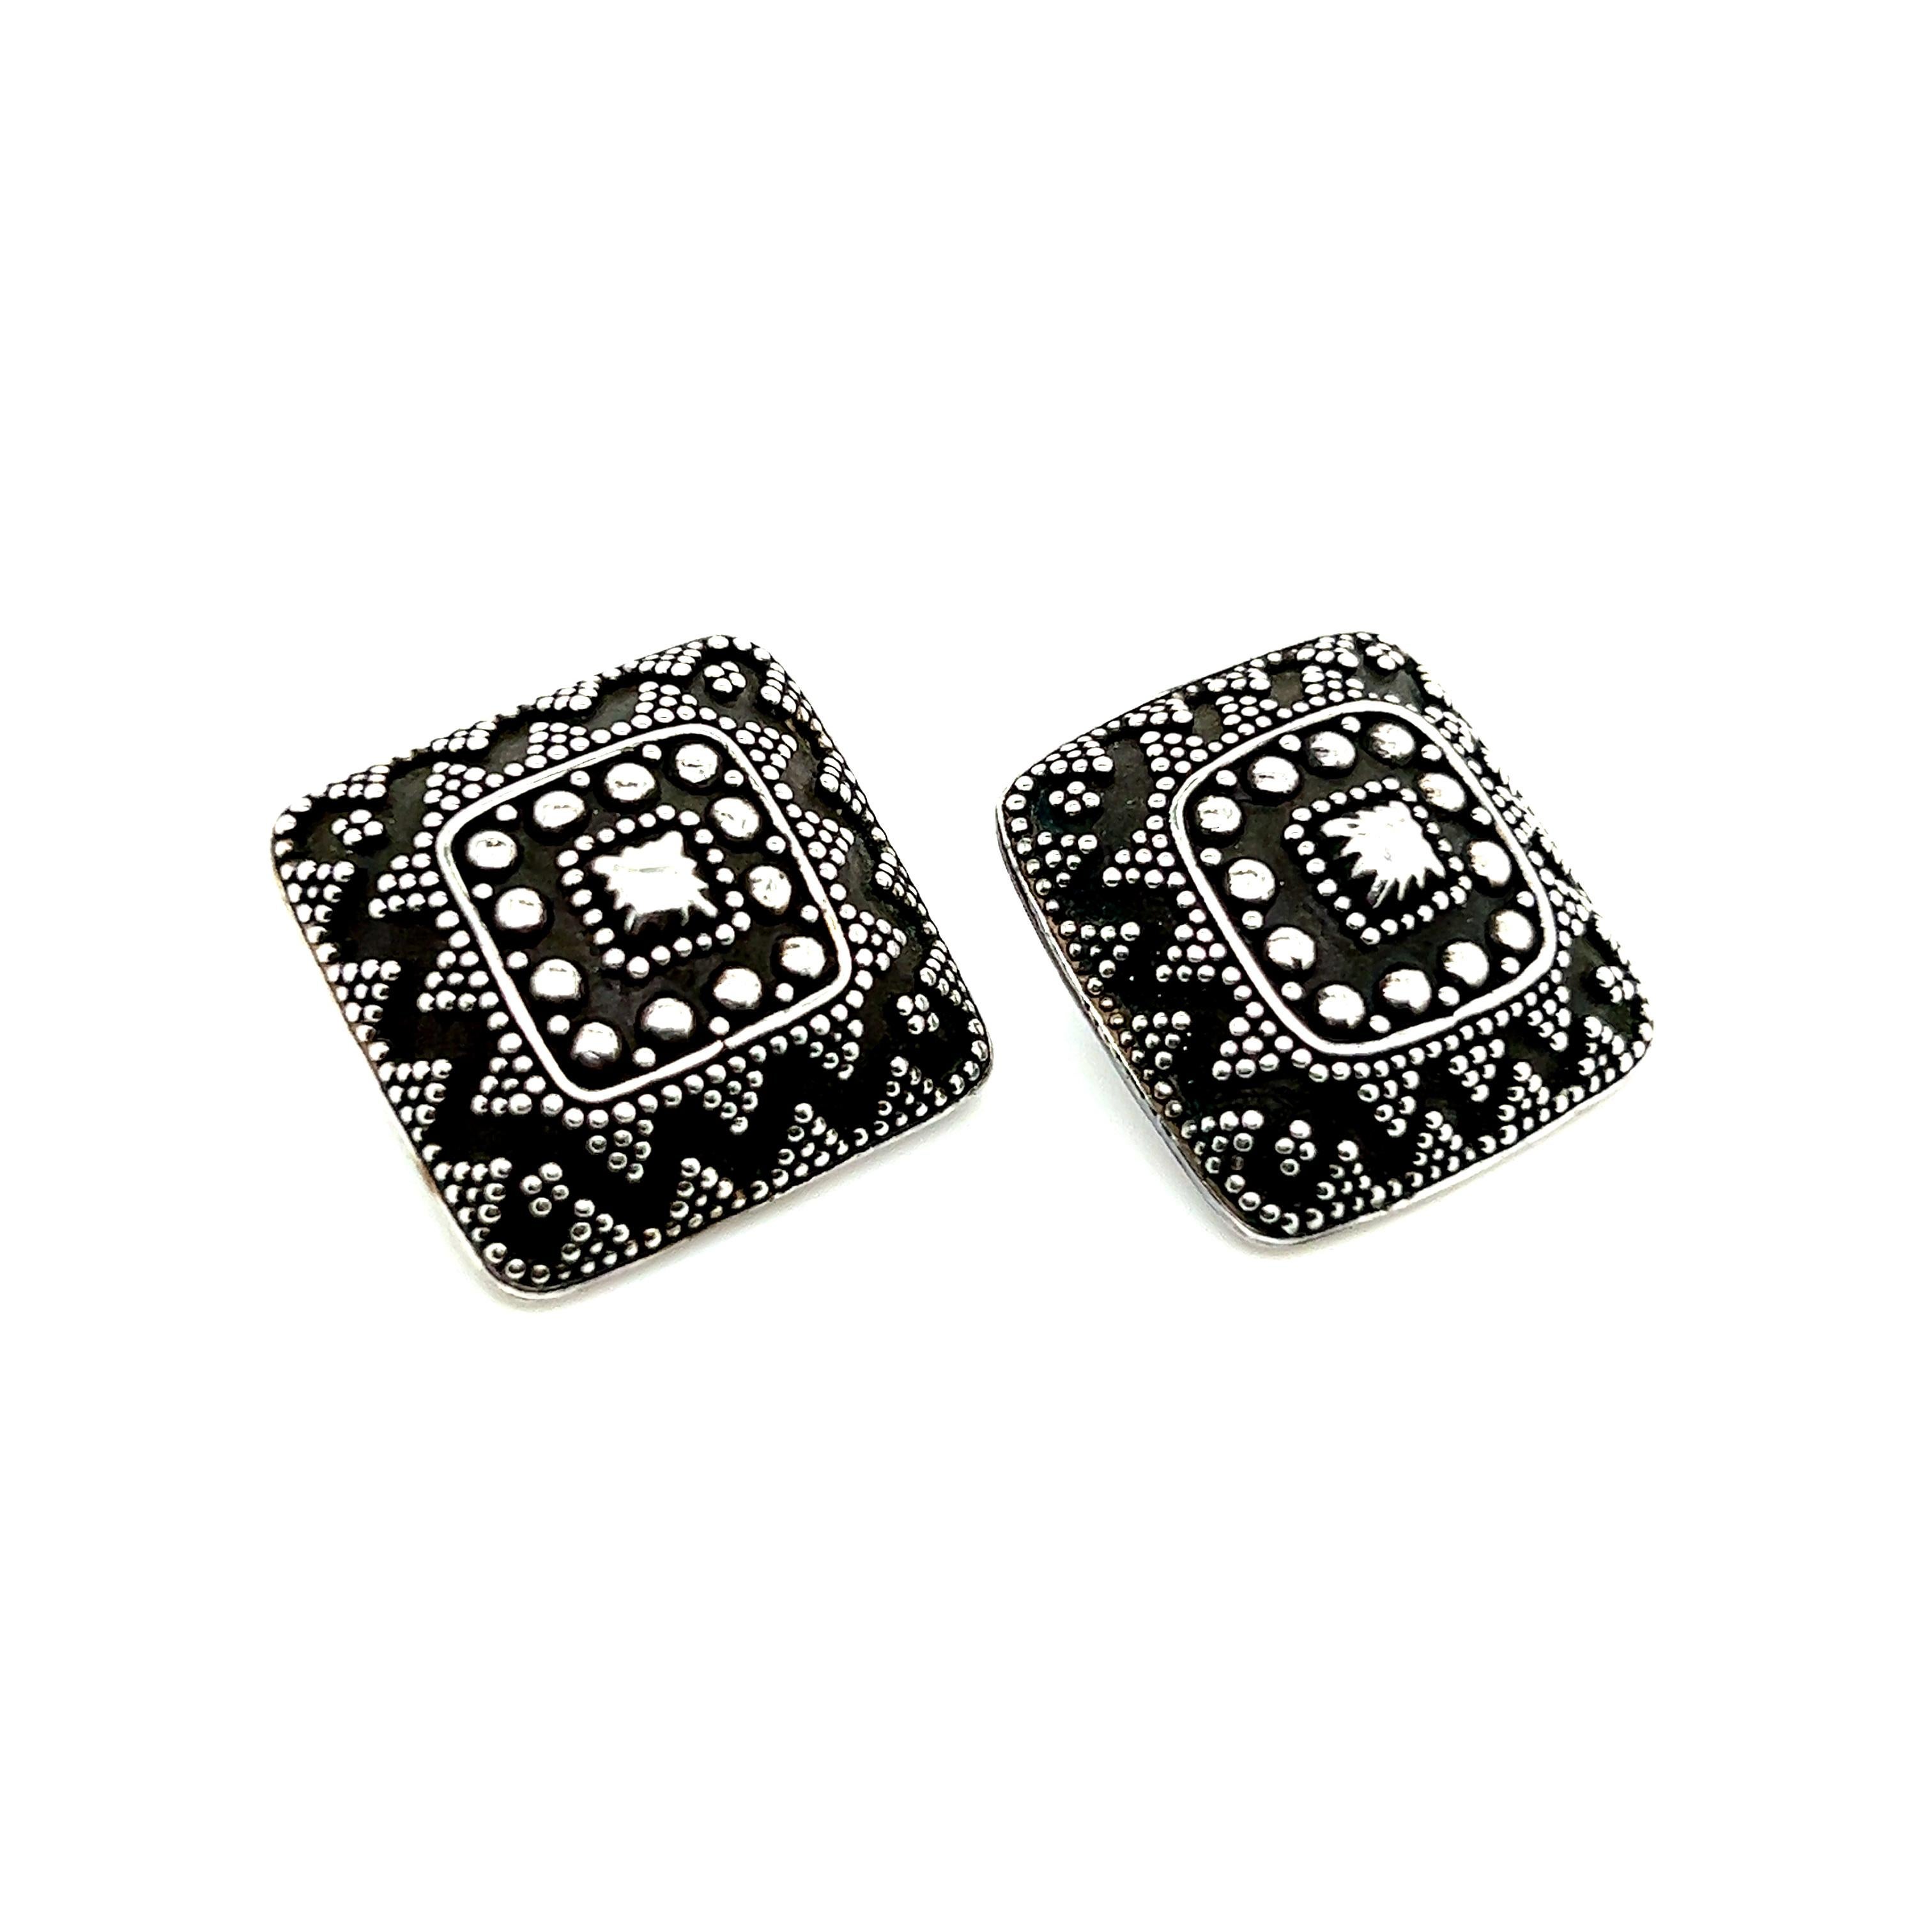 John Hardy Estate Square Ornate Clip-on Earrings Sterling Silver JH4

TRUSTED SELLER SINCE 2002

PLEASE SEE OUR HUNDREDS OF POSITIVE FEEDBACKS FROM OUR CLIENTS!!

FREE SHIPPING!!

DETAILS
Style: Square Ornate
Earrings: Clip-on
Weight: 12.7